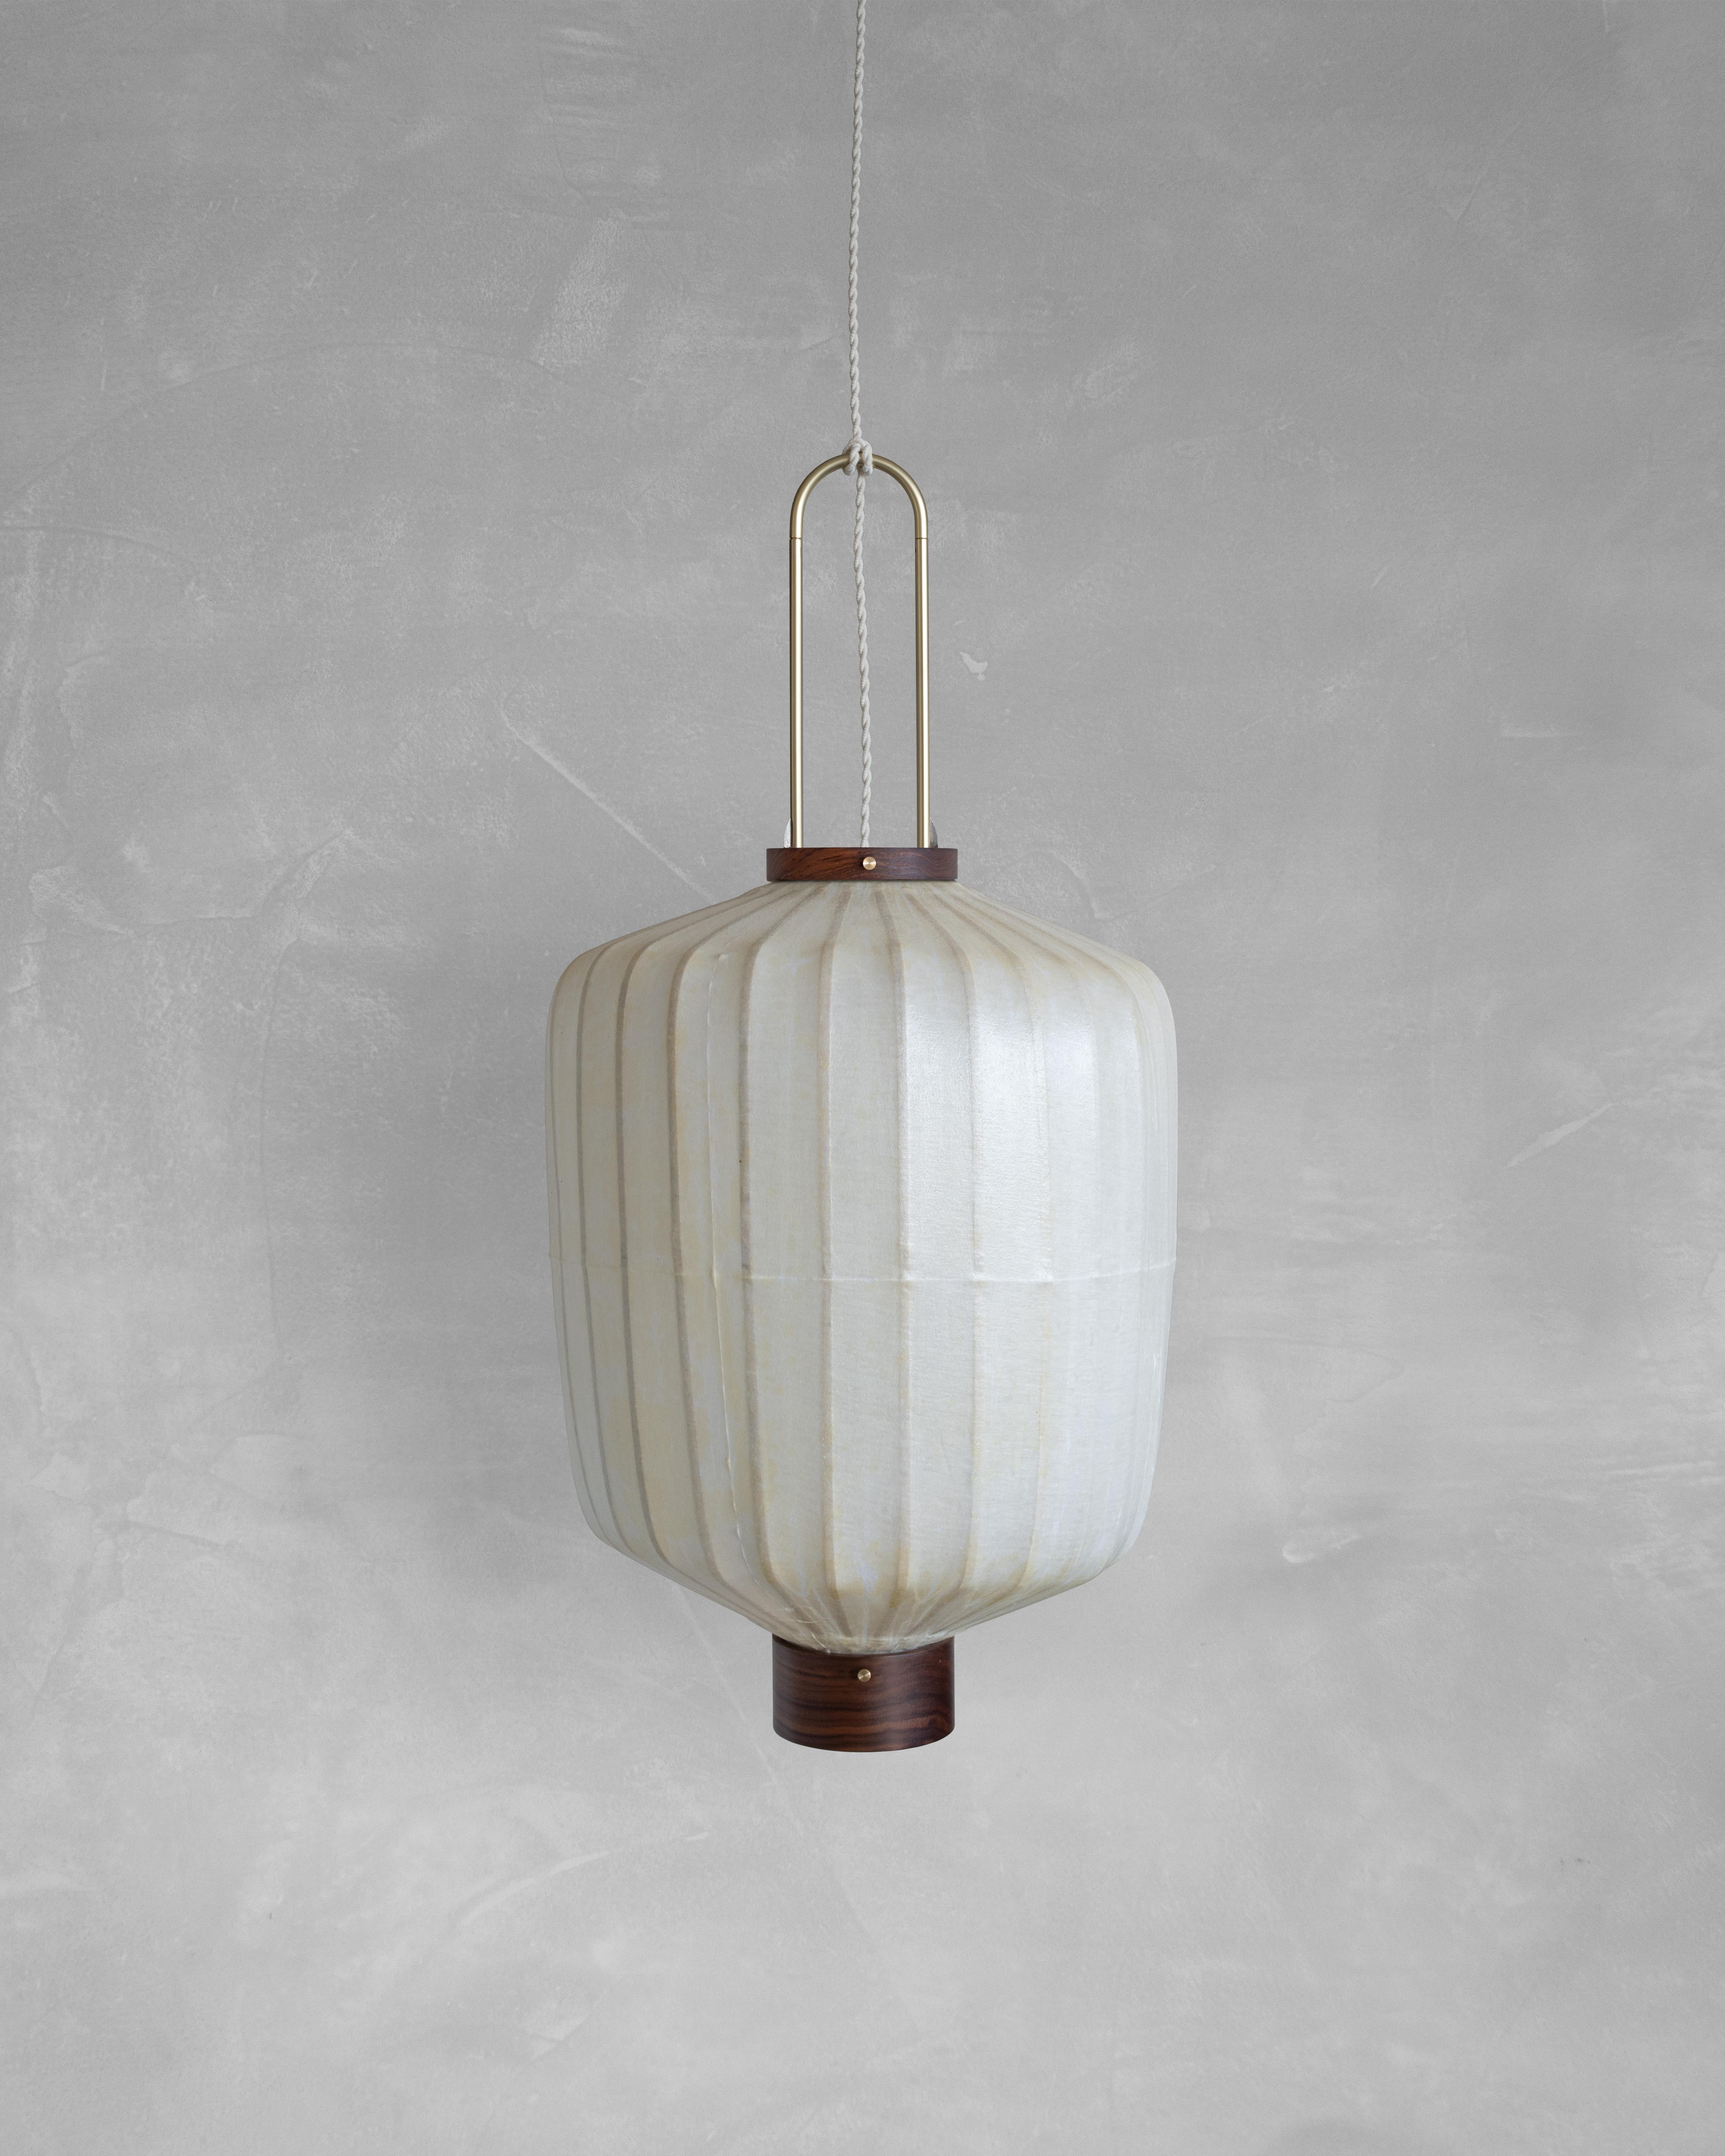 HU02O Pendant Lamp L by Taiwan Lantern
Dimensions: D 35 x W 35 x H 49 cm.
Material: Walnut & bamboo frame, Hand-colored fabrics, Metal pipes, Leather lace, Handmade porcelain ceiling cap.


This brown color is inspired by Wu Xing 五行. Brown presents